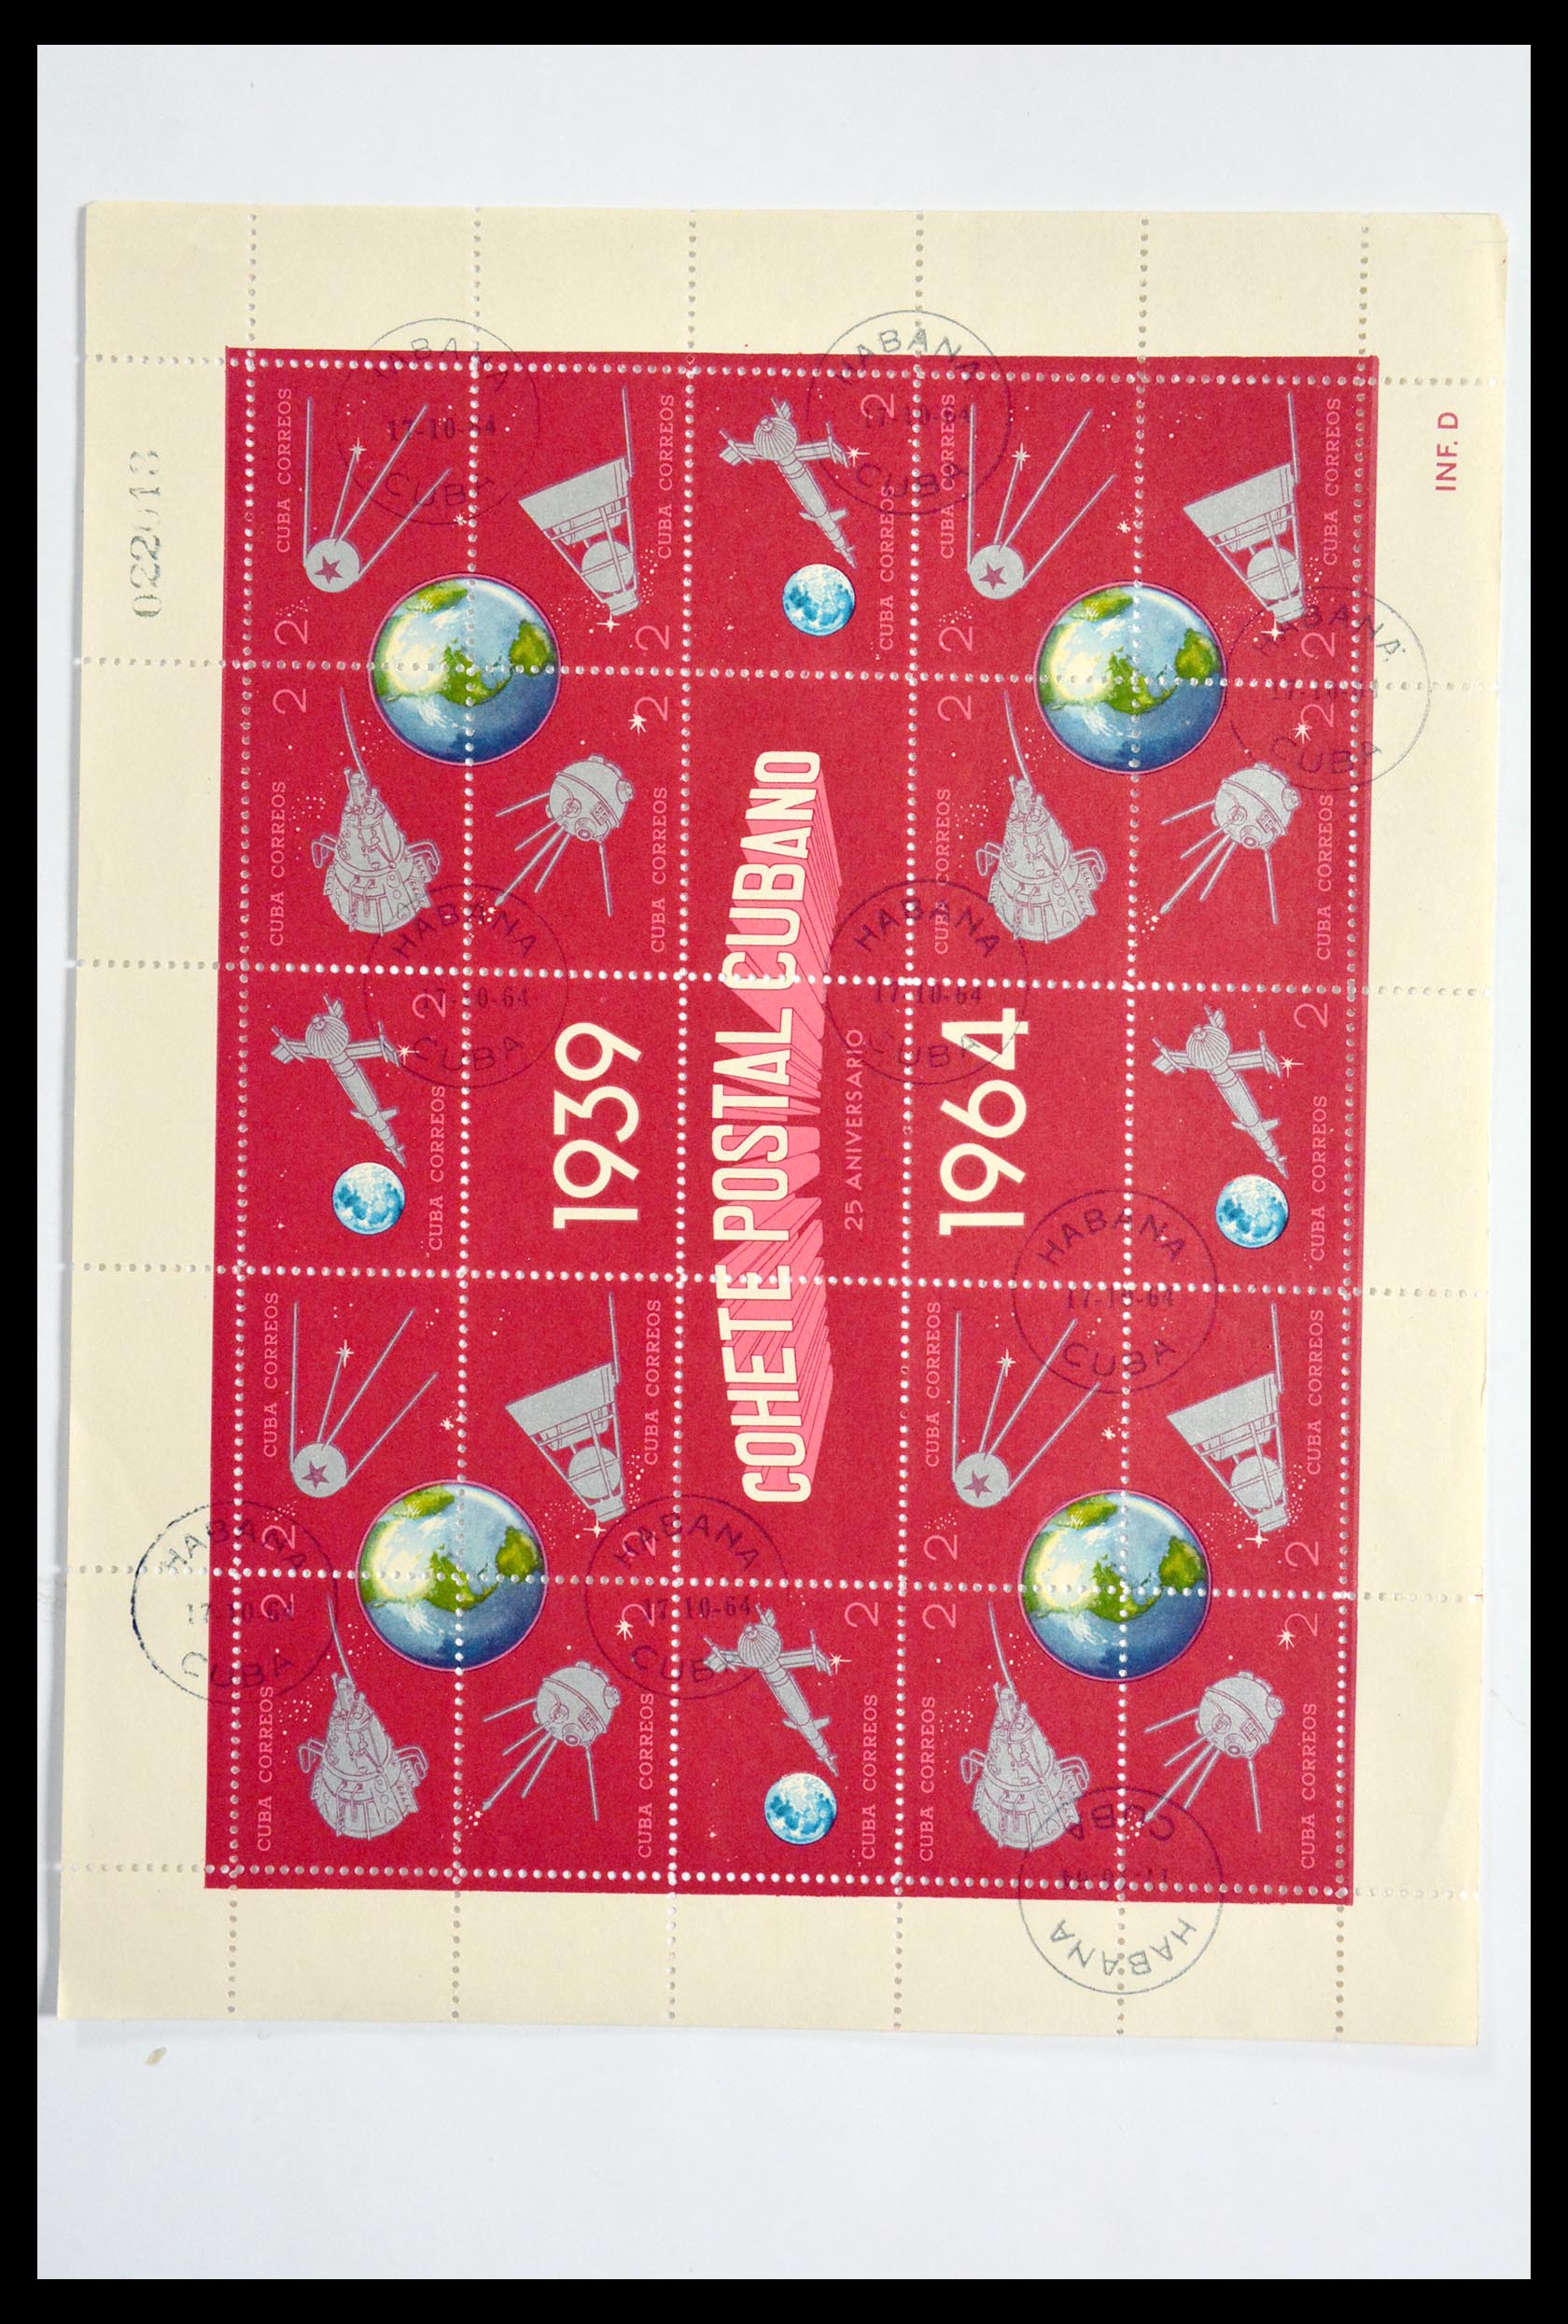 29917 070 - 29917 Latin America airmail stamps.